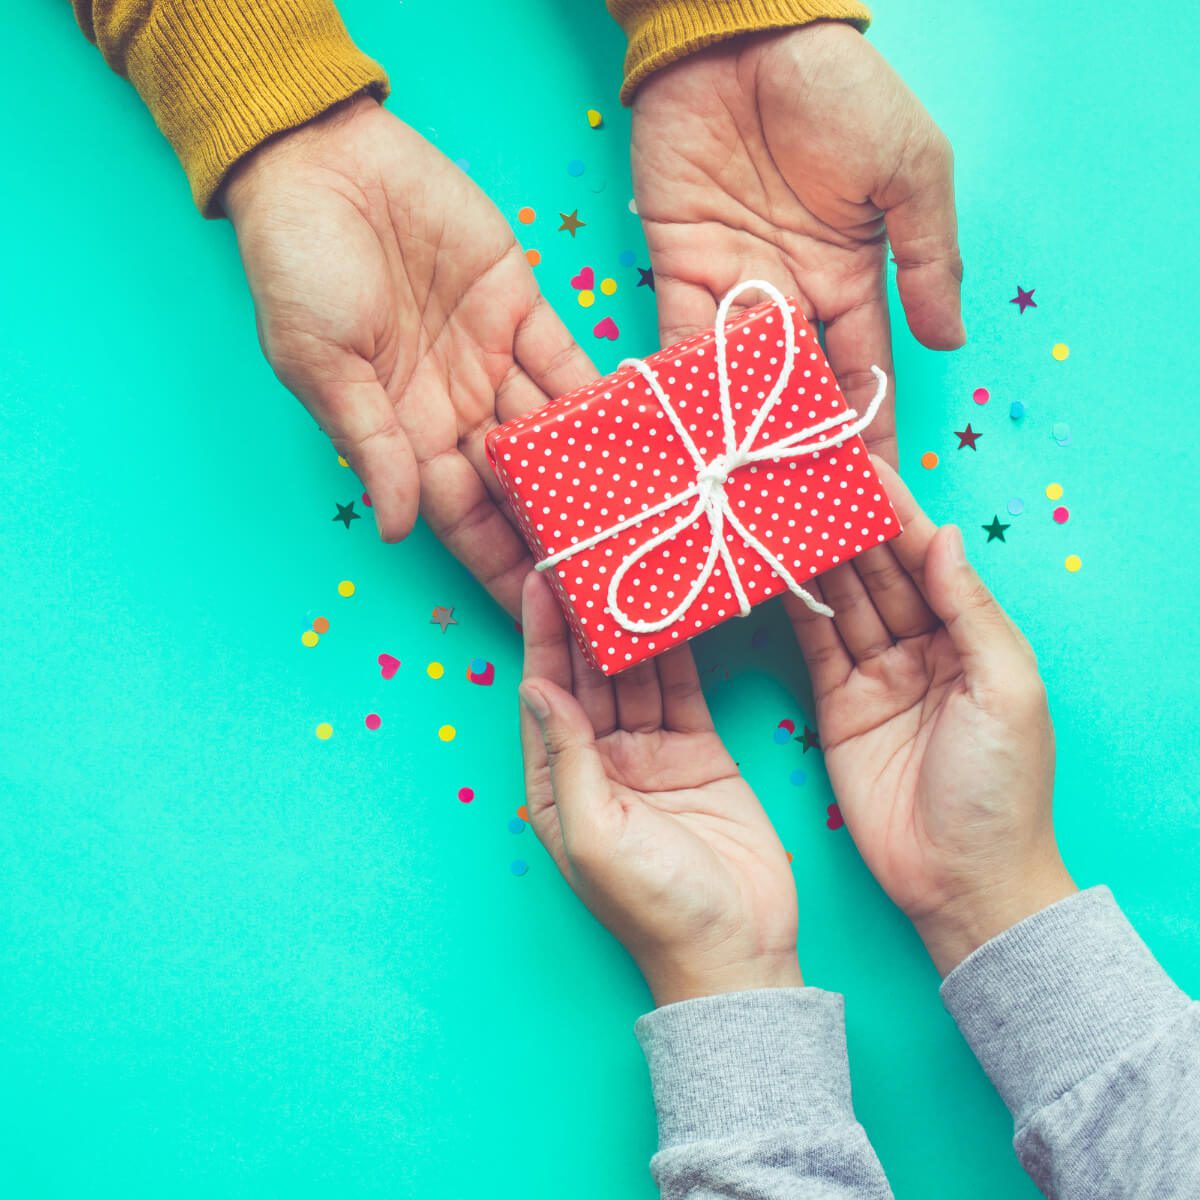 A pair of hands giving a wrapped gift to another pair of hands